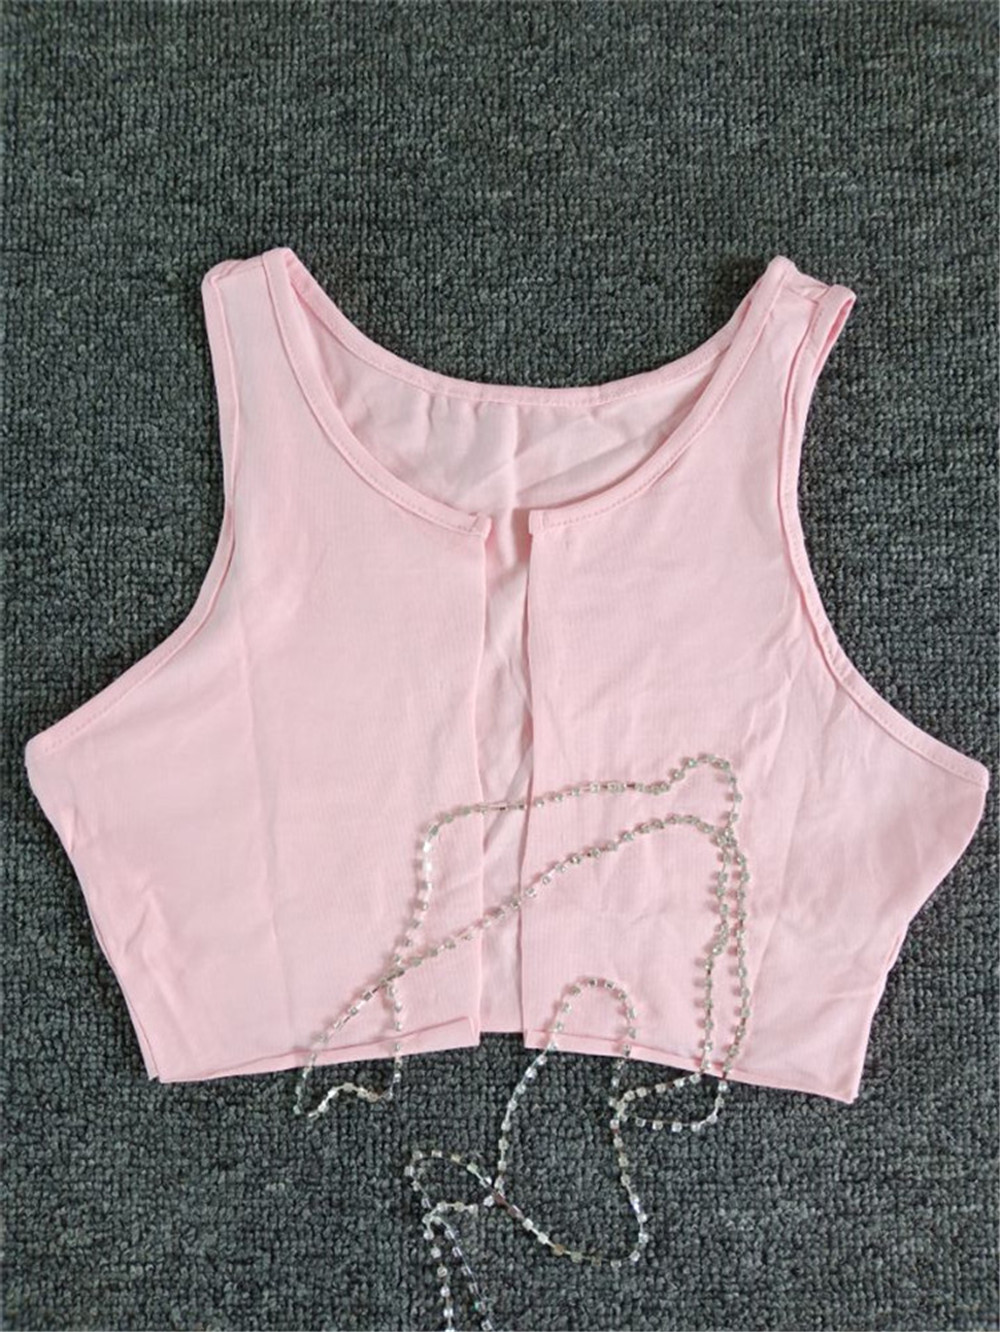 pink(With chain)